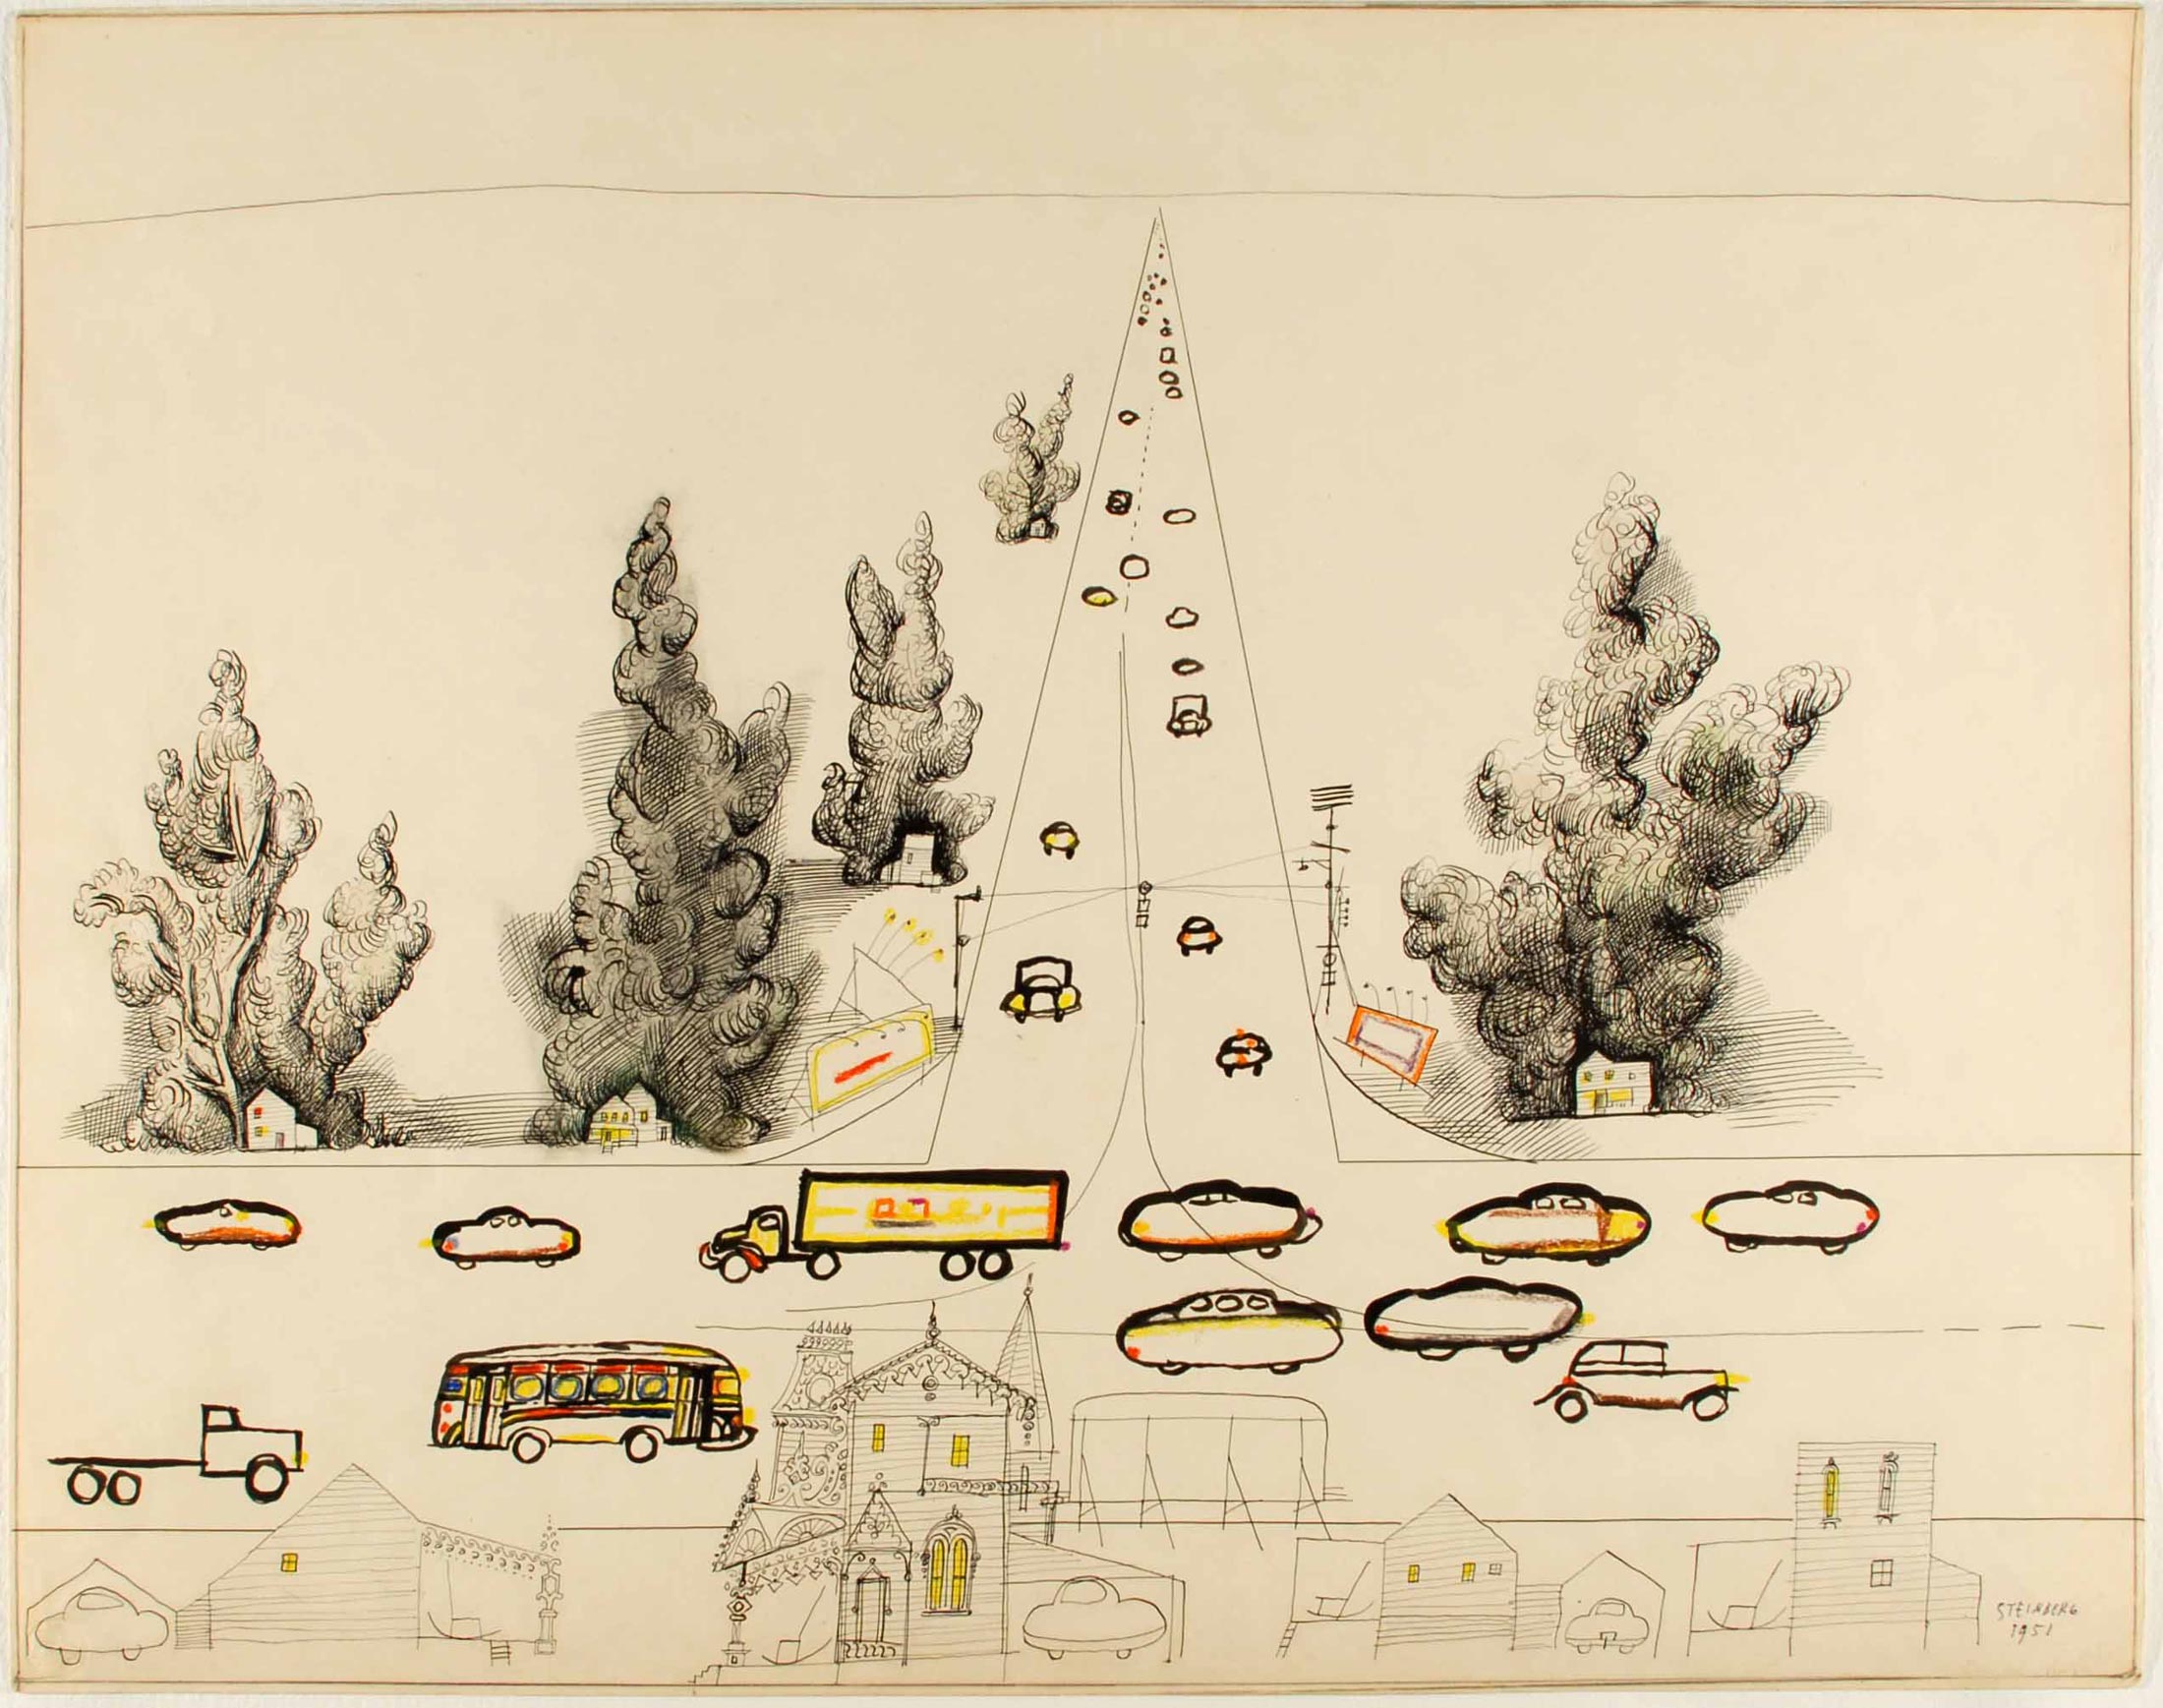 <em>Highway</em>, 1951. Ink, crayon, and pencil on paper, 23 x 29 in. The Saul Steinberg Foundation.